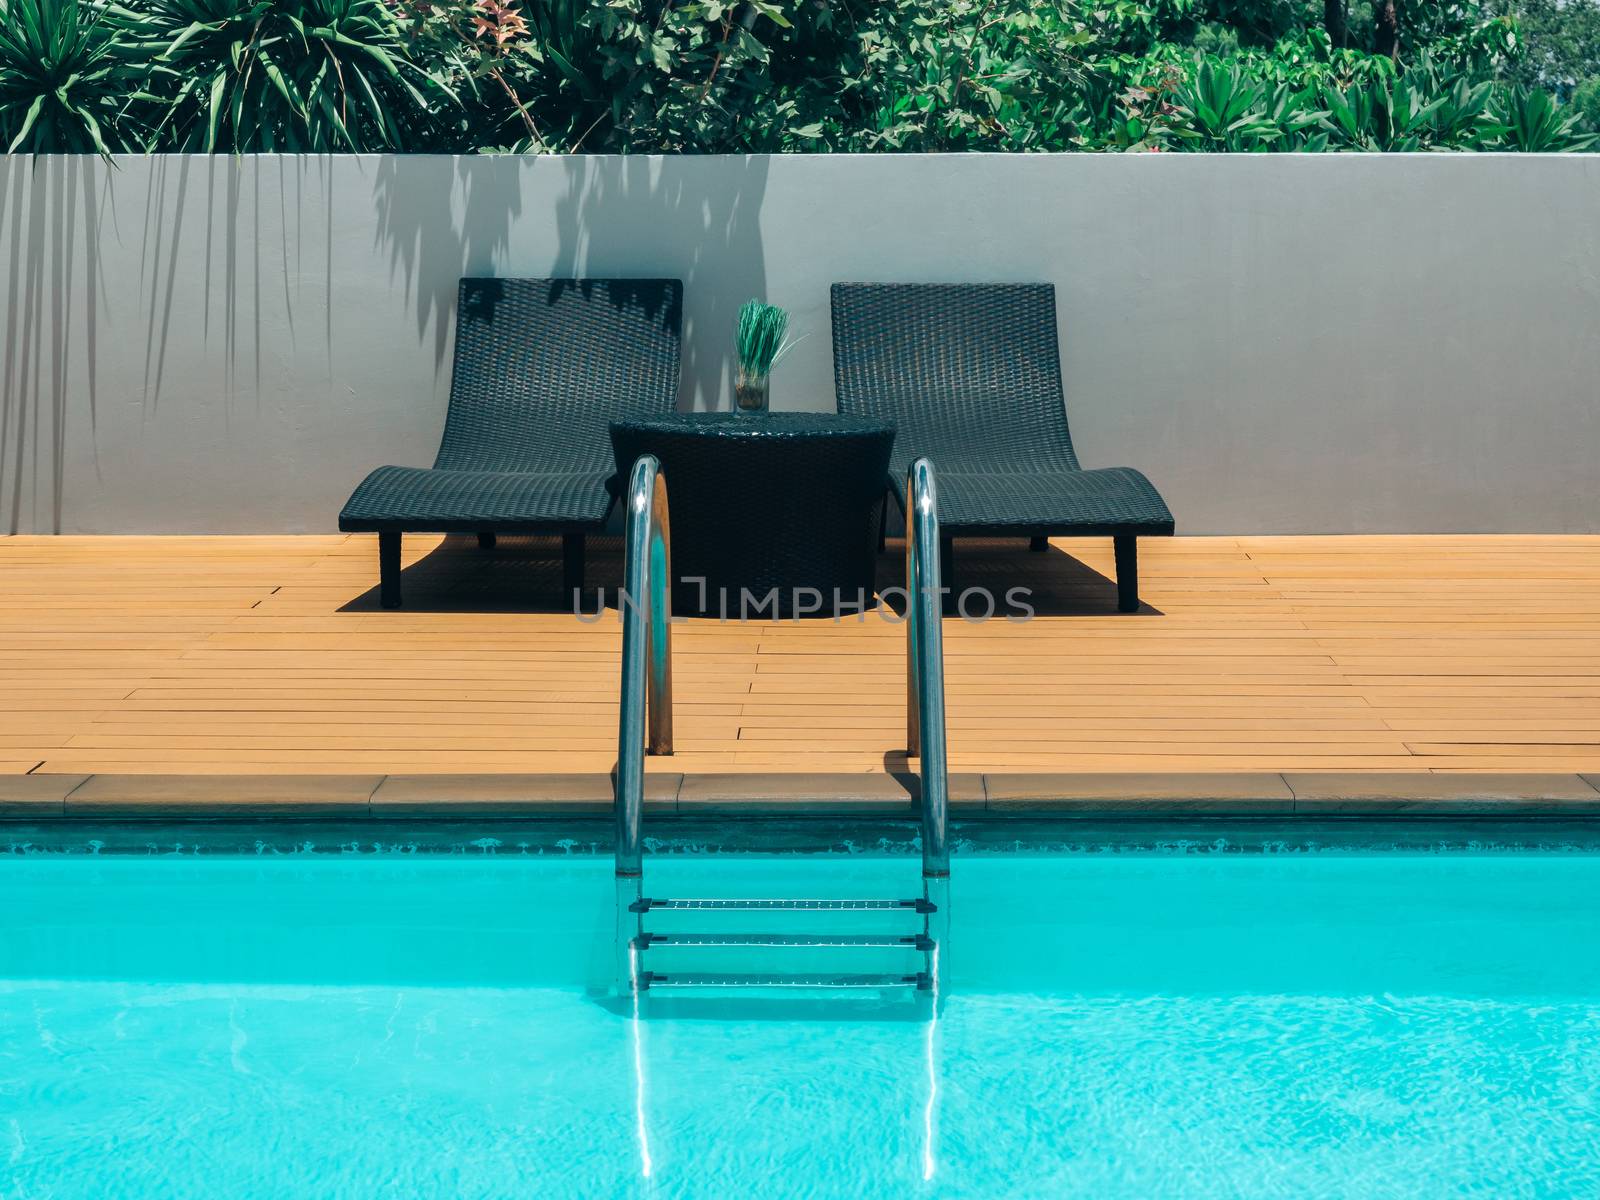 Outdoor swimming pool background minimal style. Grab bars ladder in the blue swimming pool with two black sunbed and green shrubs on grey wall.